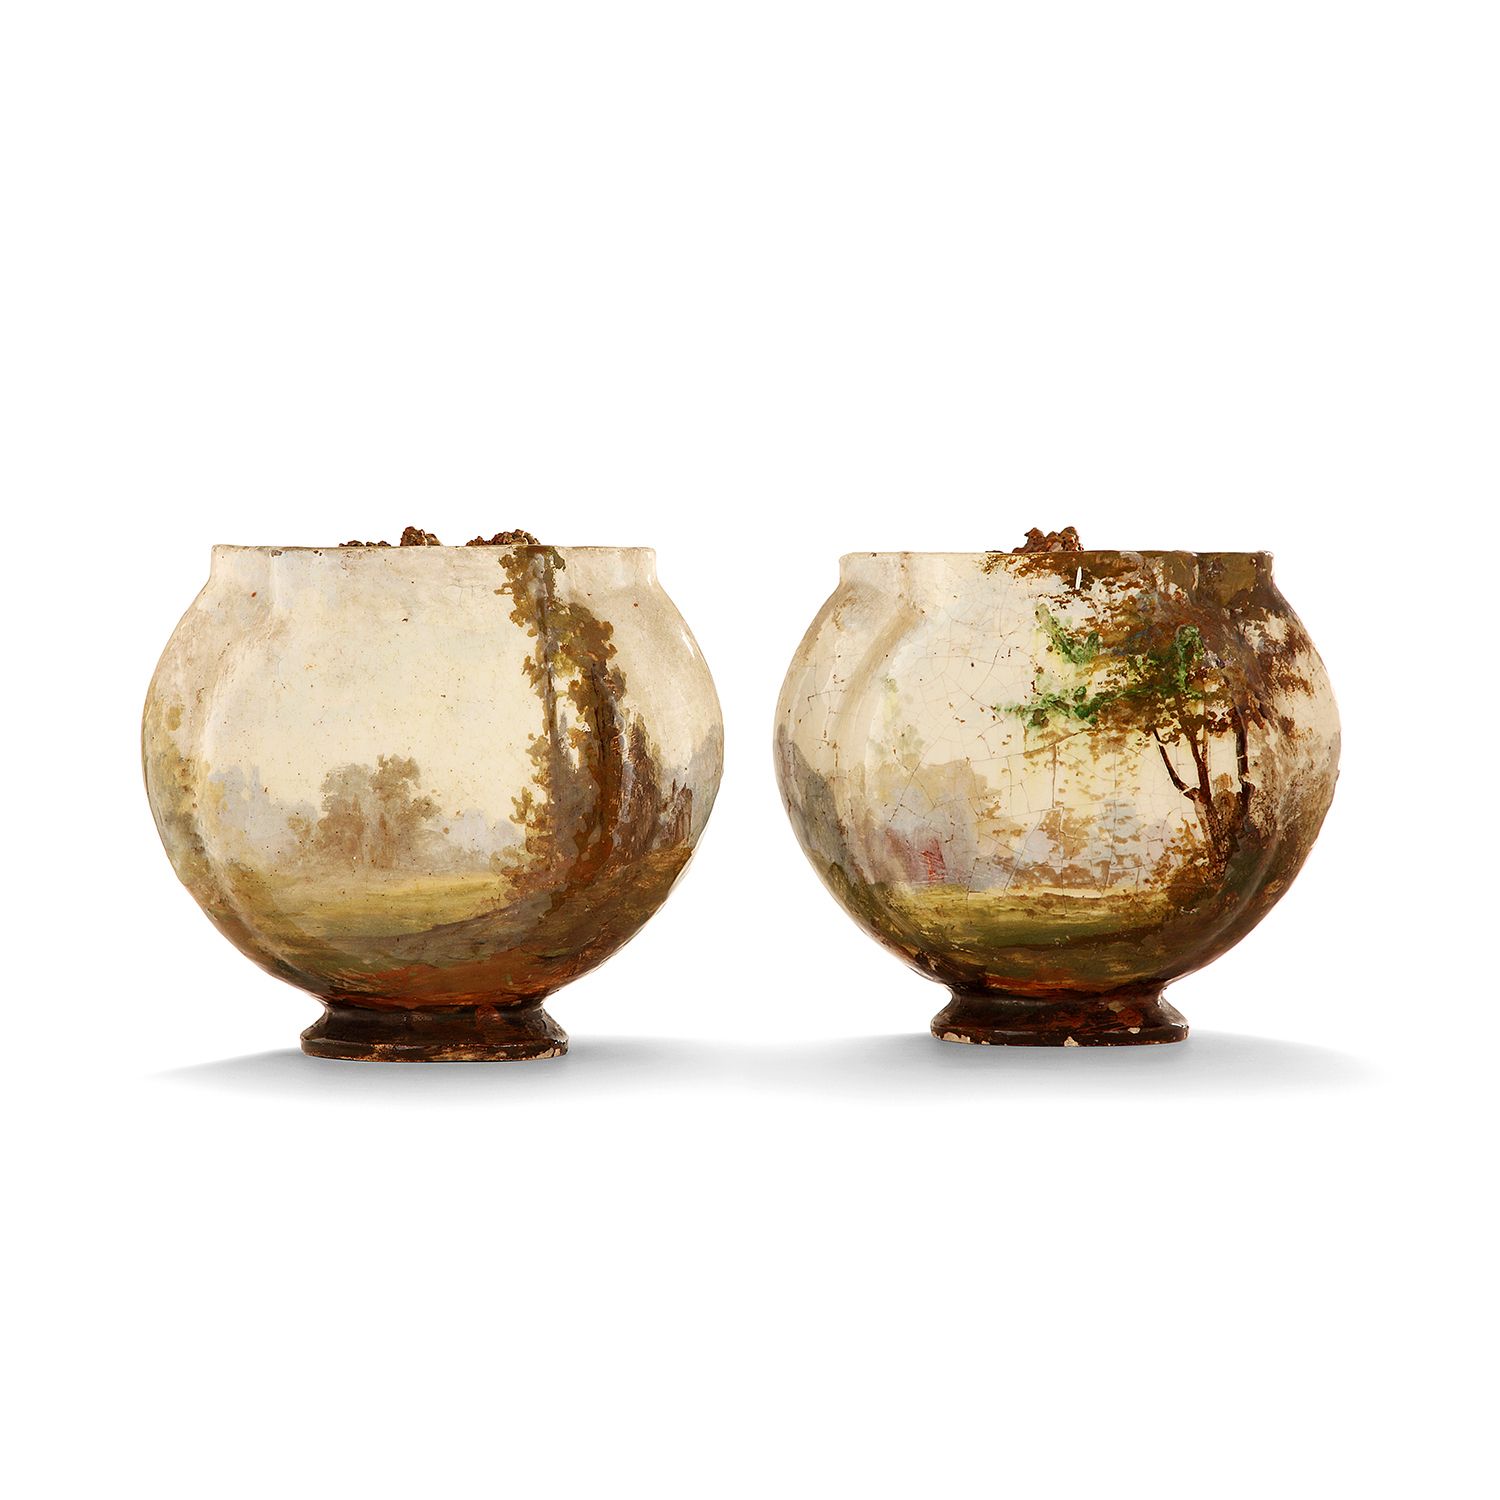 Null MONTIGNY SUR LOING (ATTRIBUTED TO)

Pair of earthenware billet vases with f&hellip;